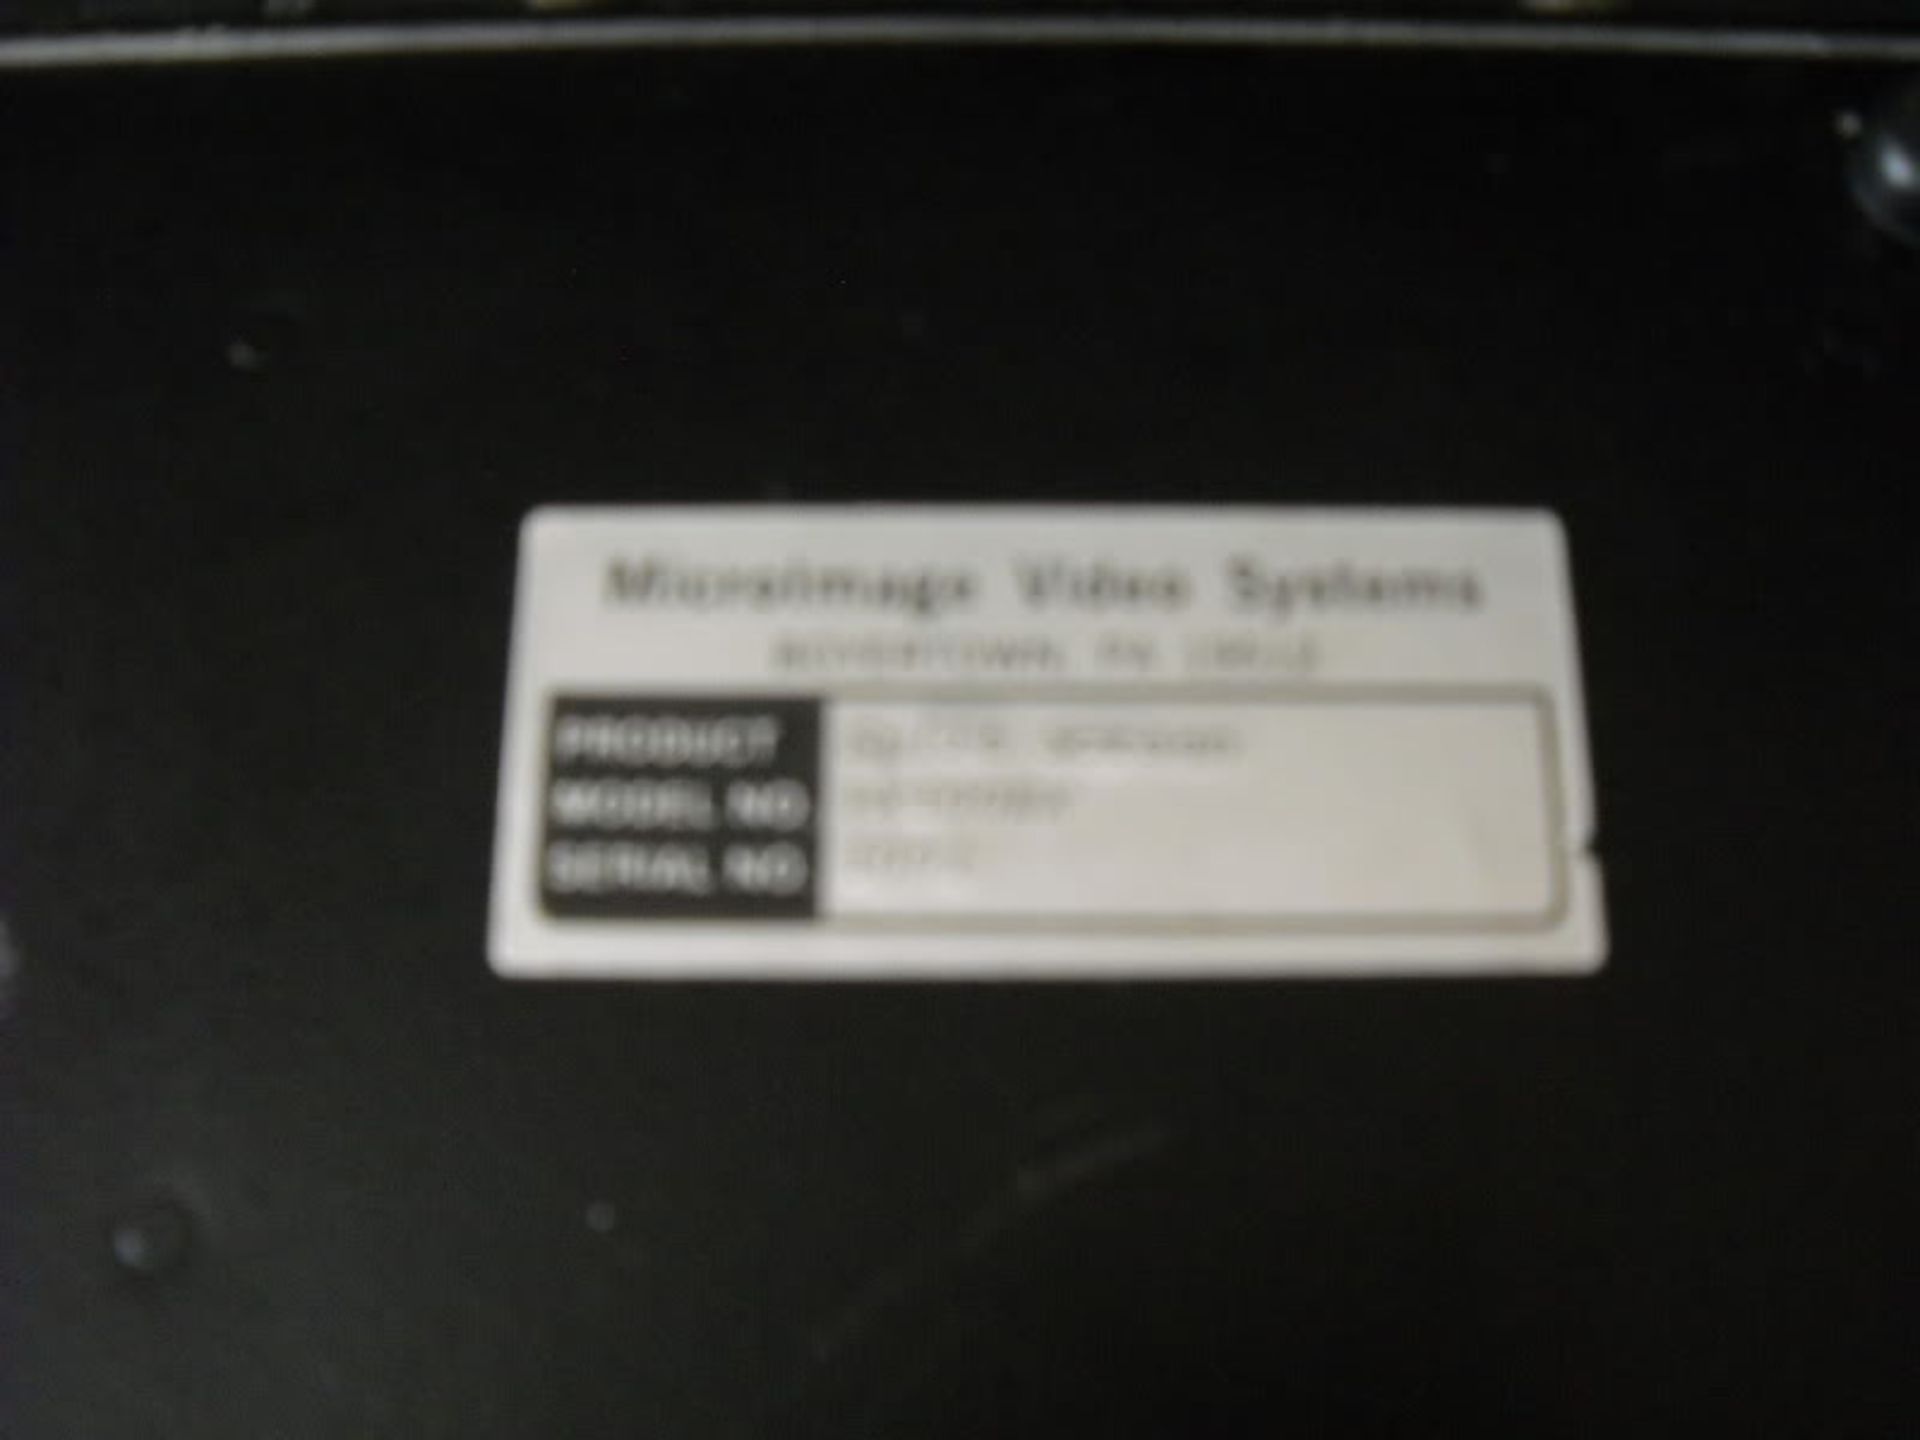 Microimage Video System PIX/2 Screen Splitter Model PX100EX, Qty 1 , 330782769917 - Image 4 of 4